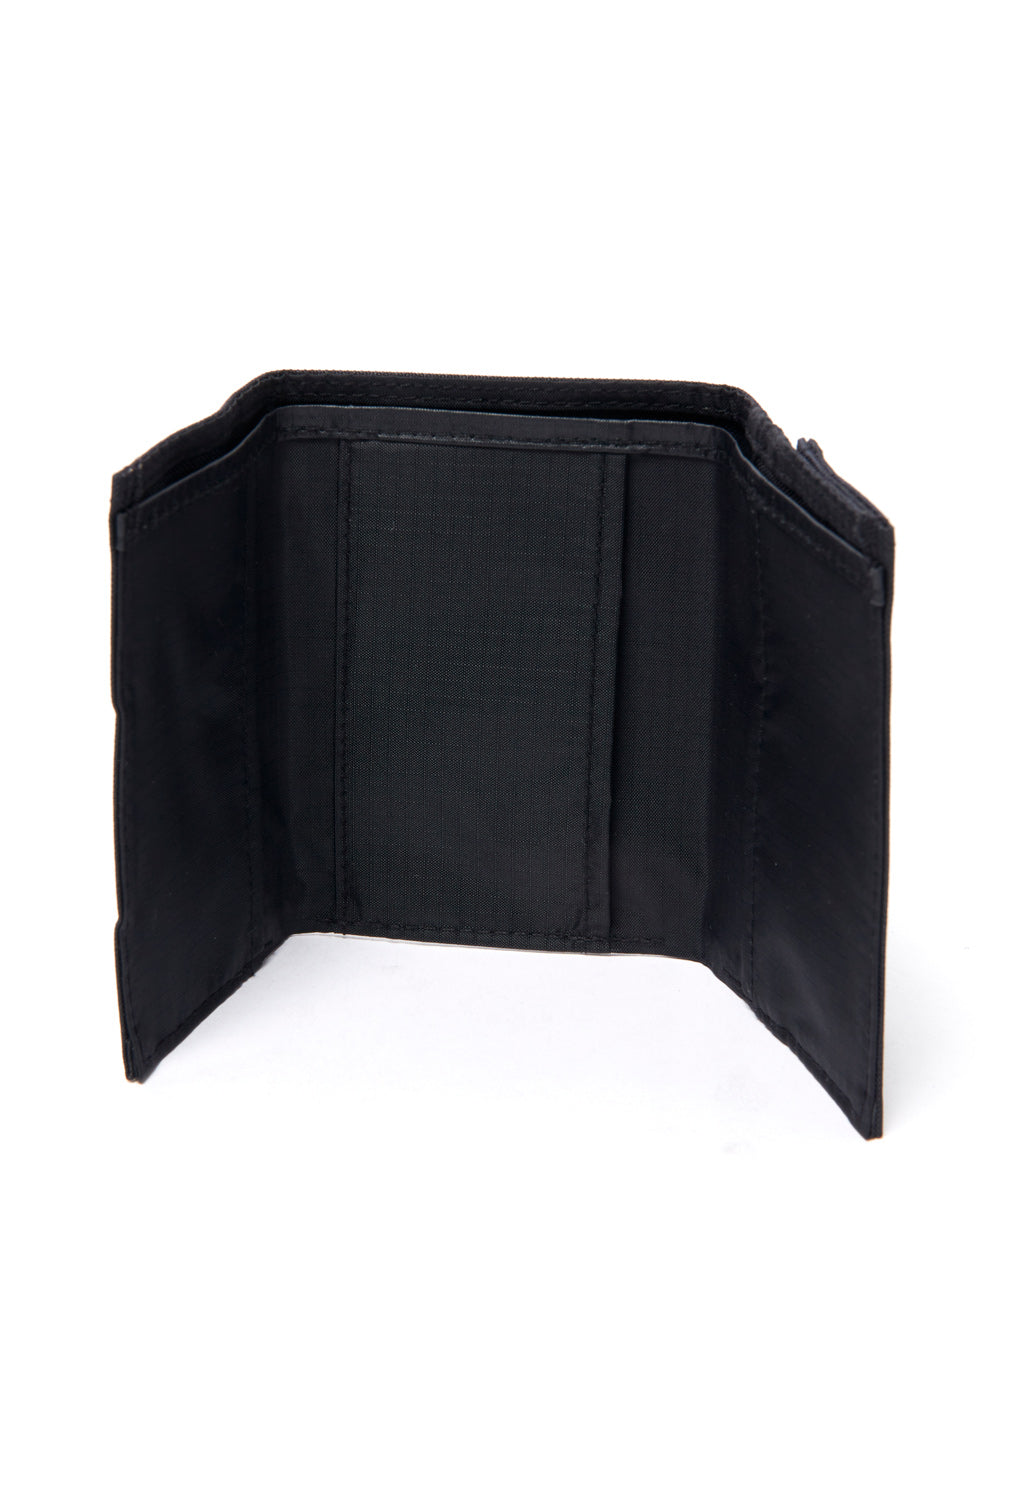 Montbell Trail Wallet - Black